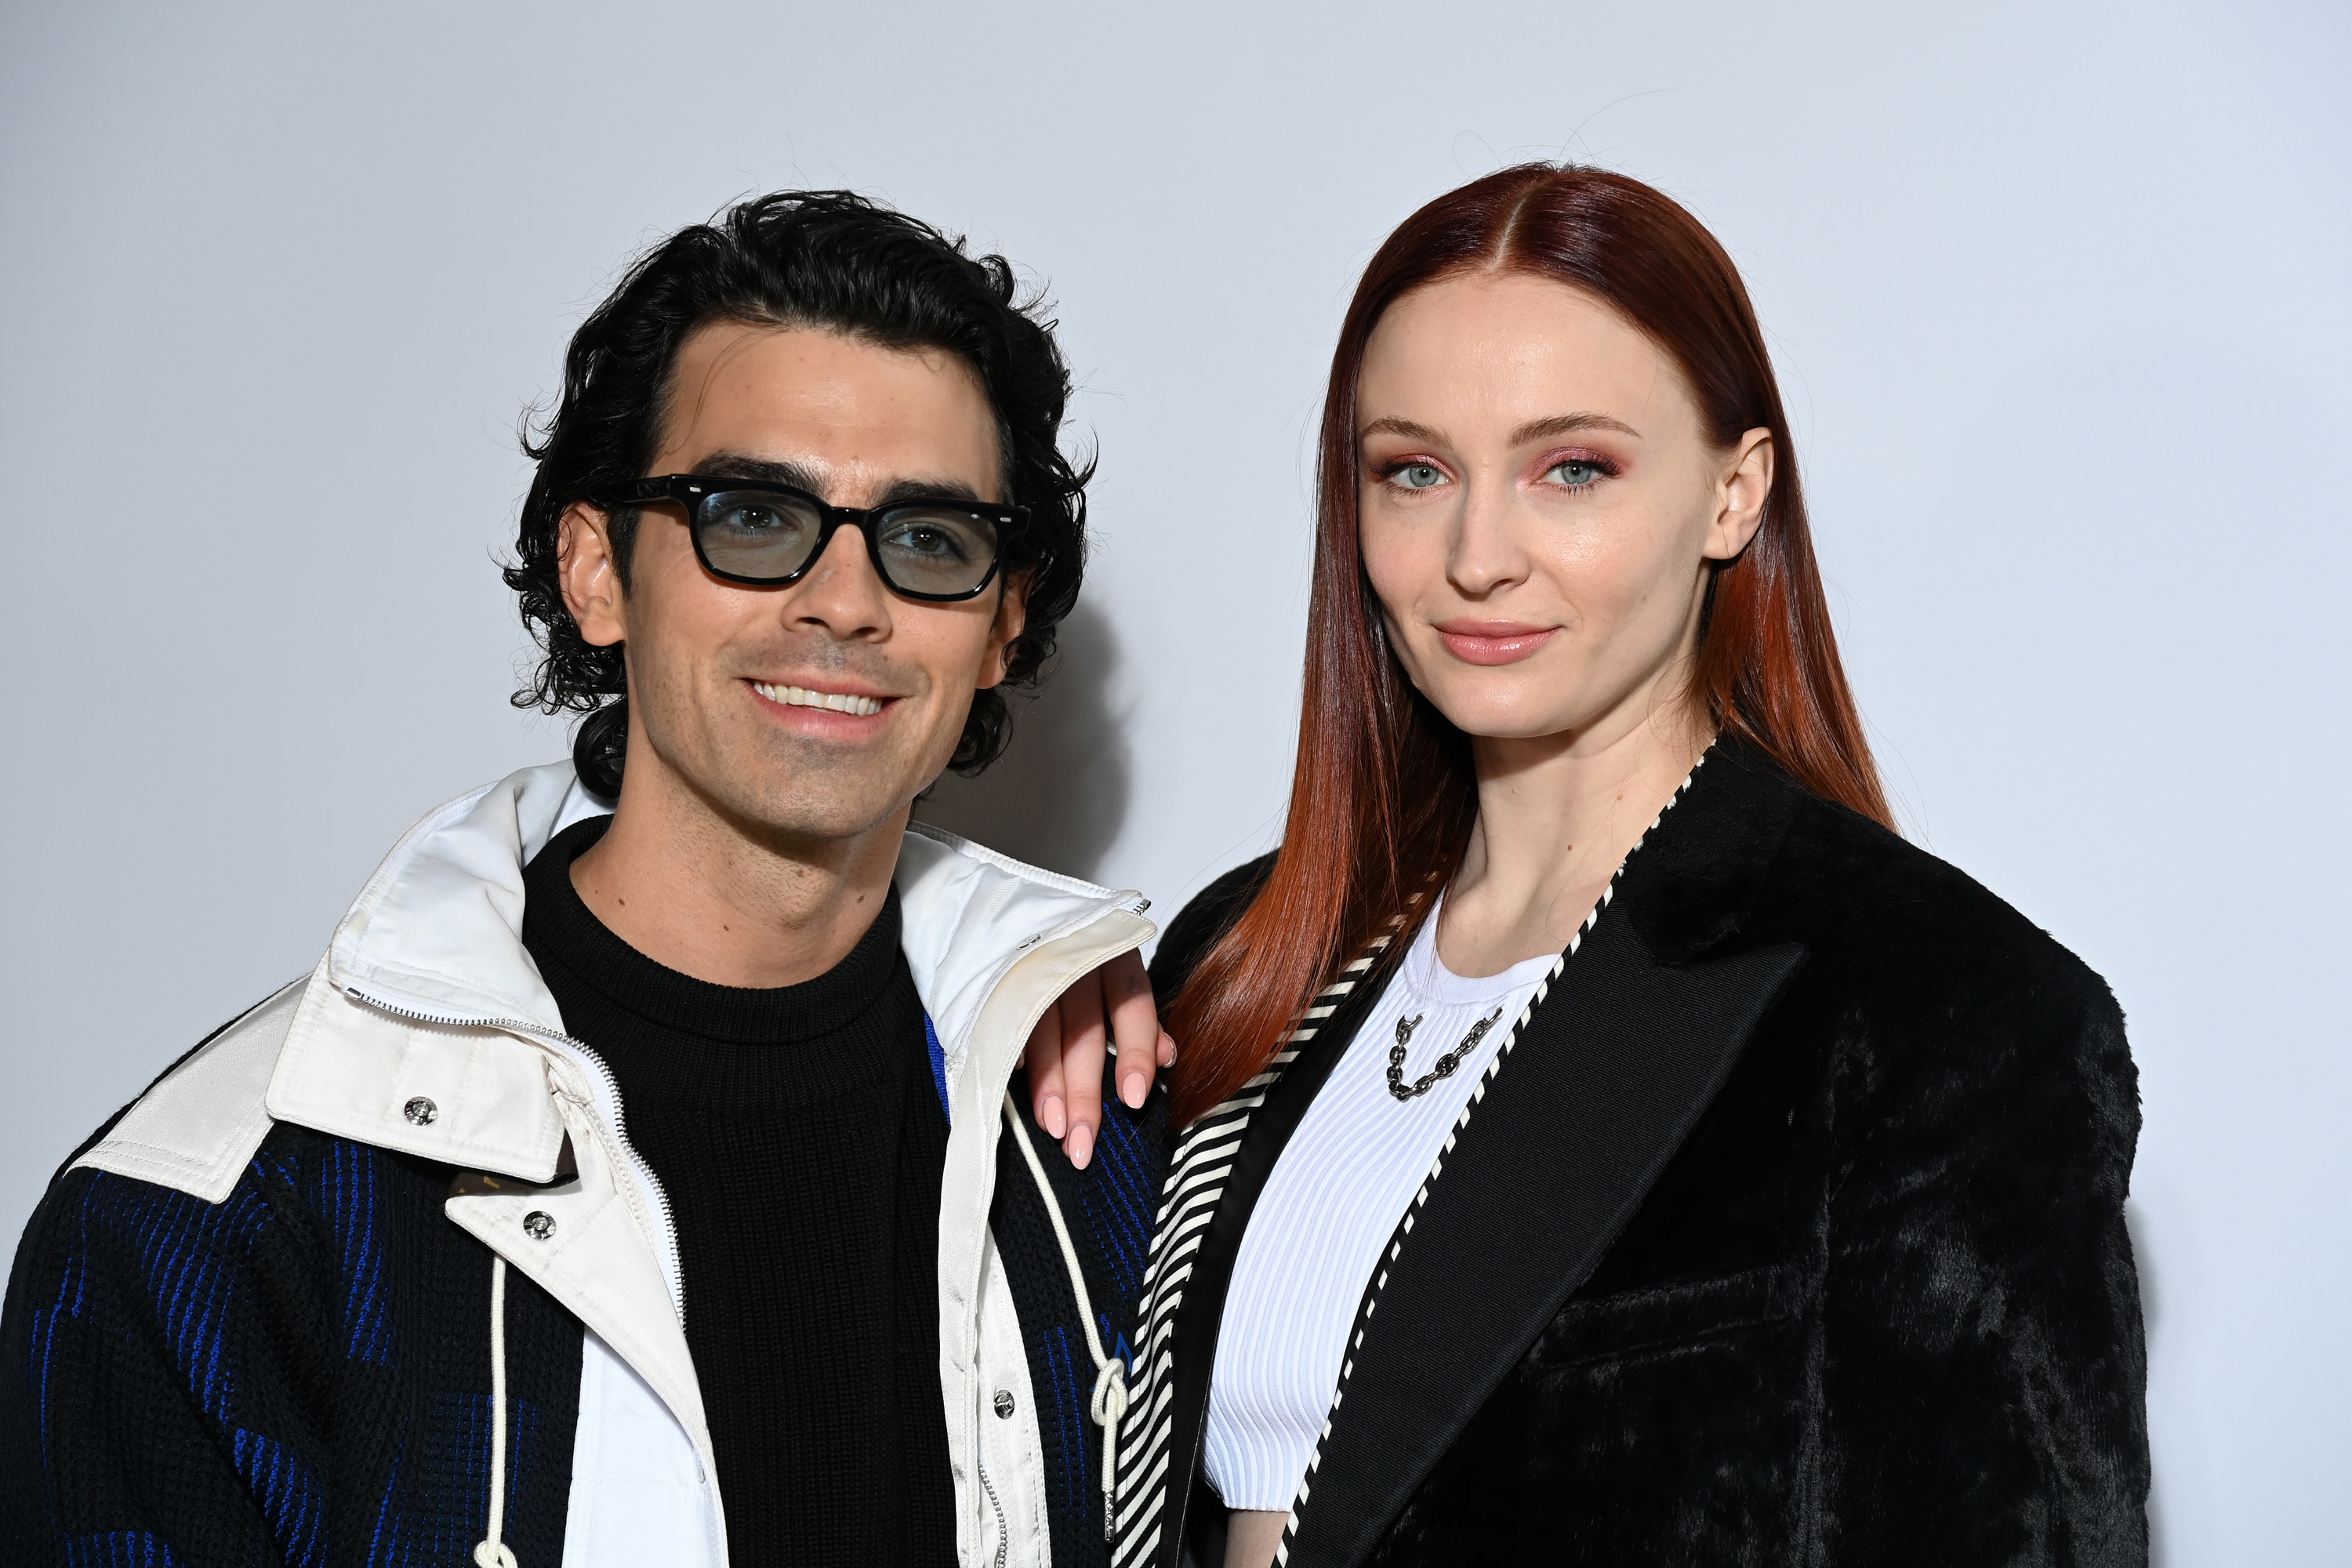 Joe Jonas and Sophie Turner smile as they appear at the Louis Vuitton Womenswear Fall/Winter 2022/2023 show at Paris Fashion Week in March 2022